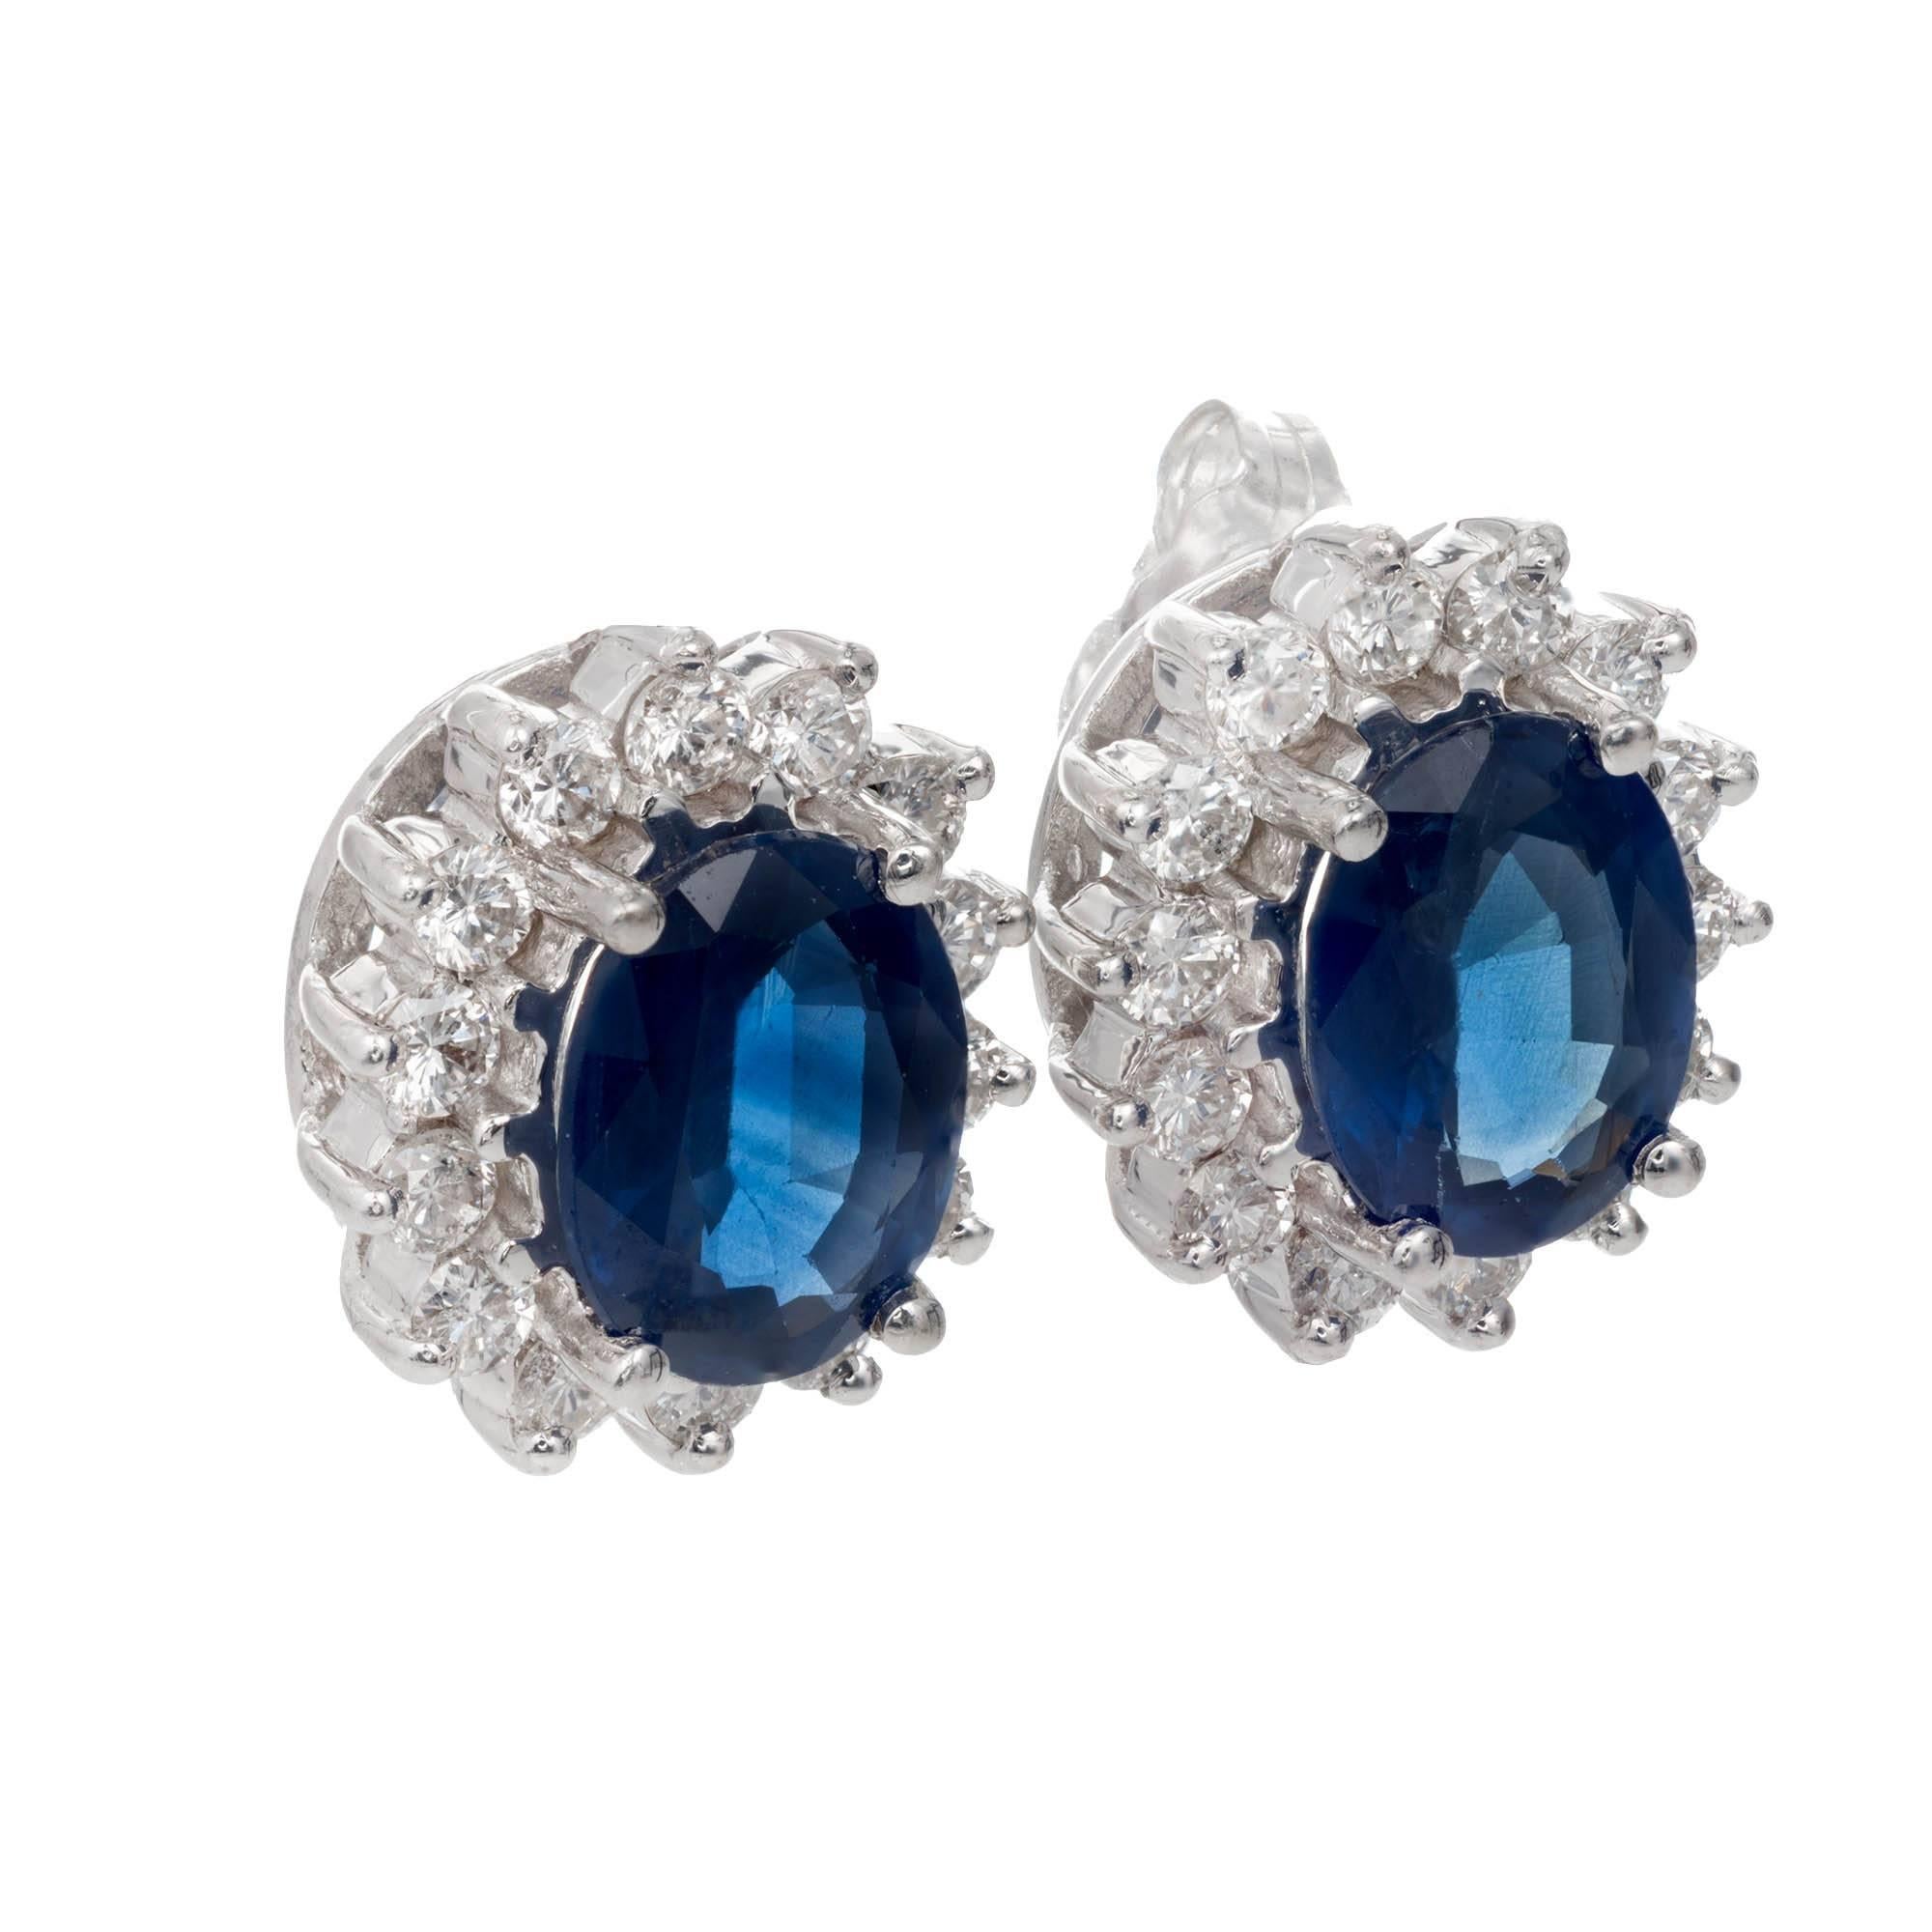 GIA Certified 3.10 Carat Cornflower Blue oval Sapphire Diamond halo 18k white gold Stud Earrings. 

2 oval Sapphire, approx. total weight 3.10cts, 8 x 6mm. Bright deep cornflower blue natural Sapphire CMT Type 1 simple heat TE only. GIA certificate